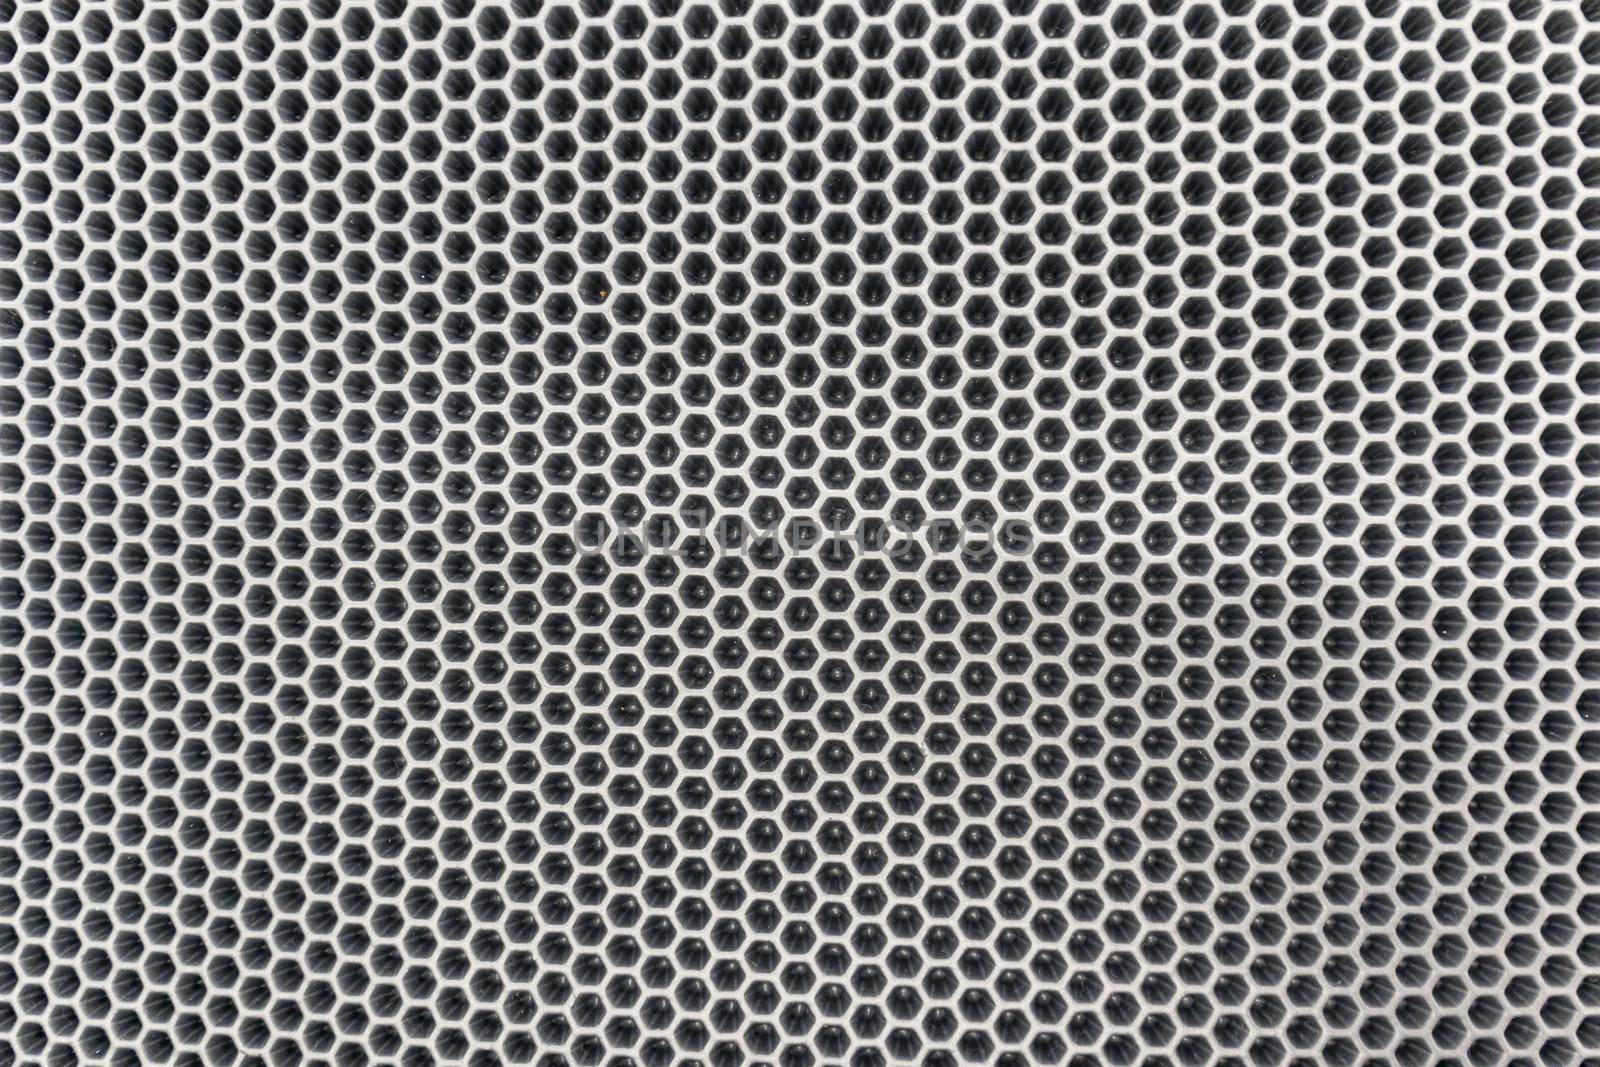 honeycombs . honeycomb pattern in black and white by roman112007